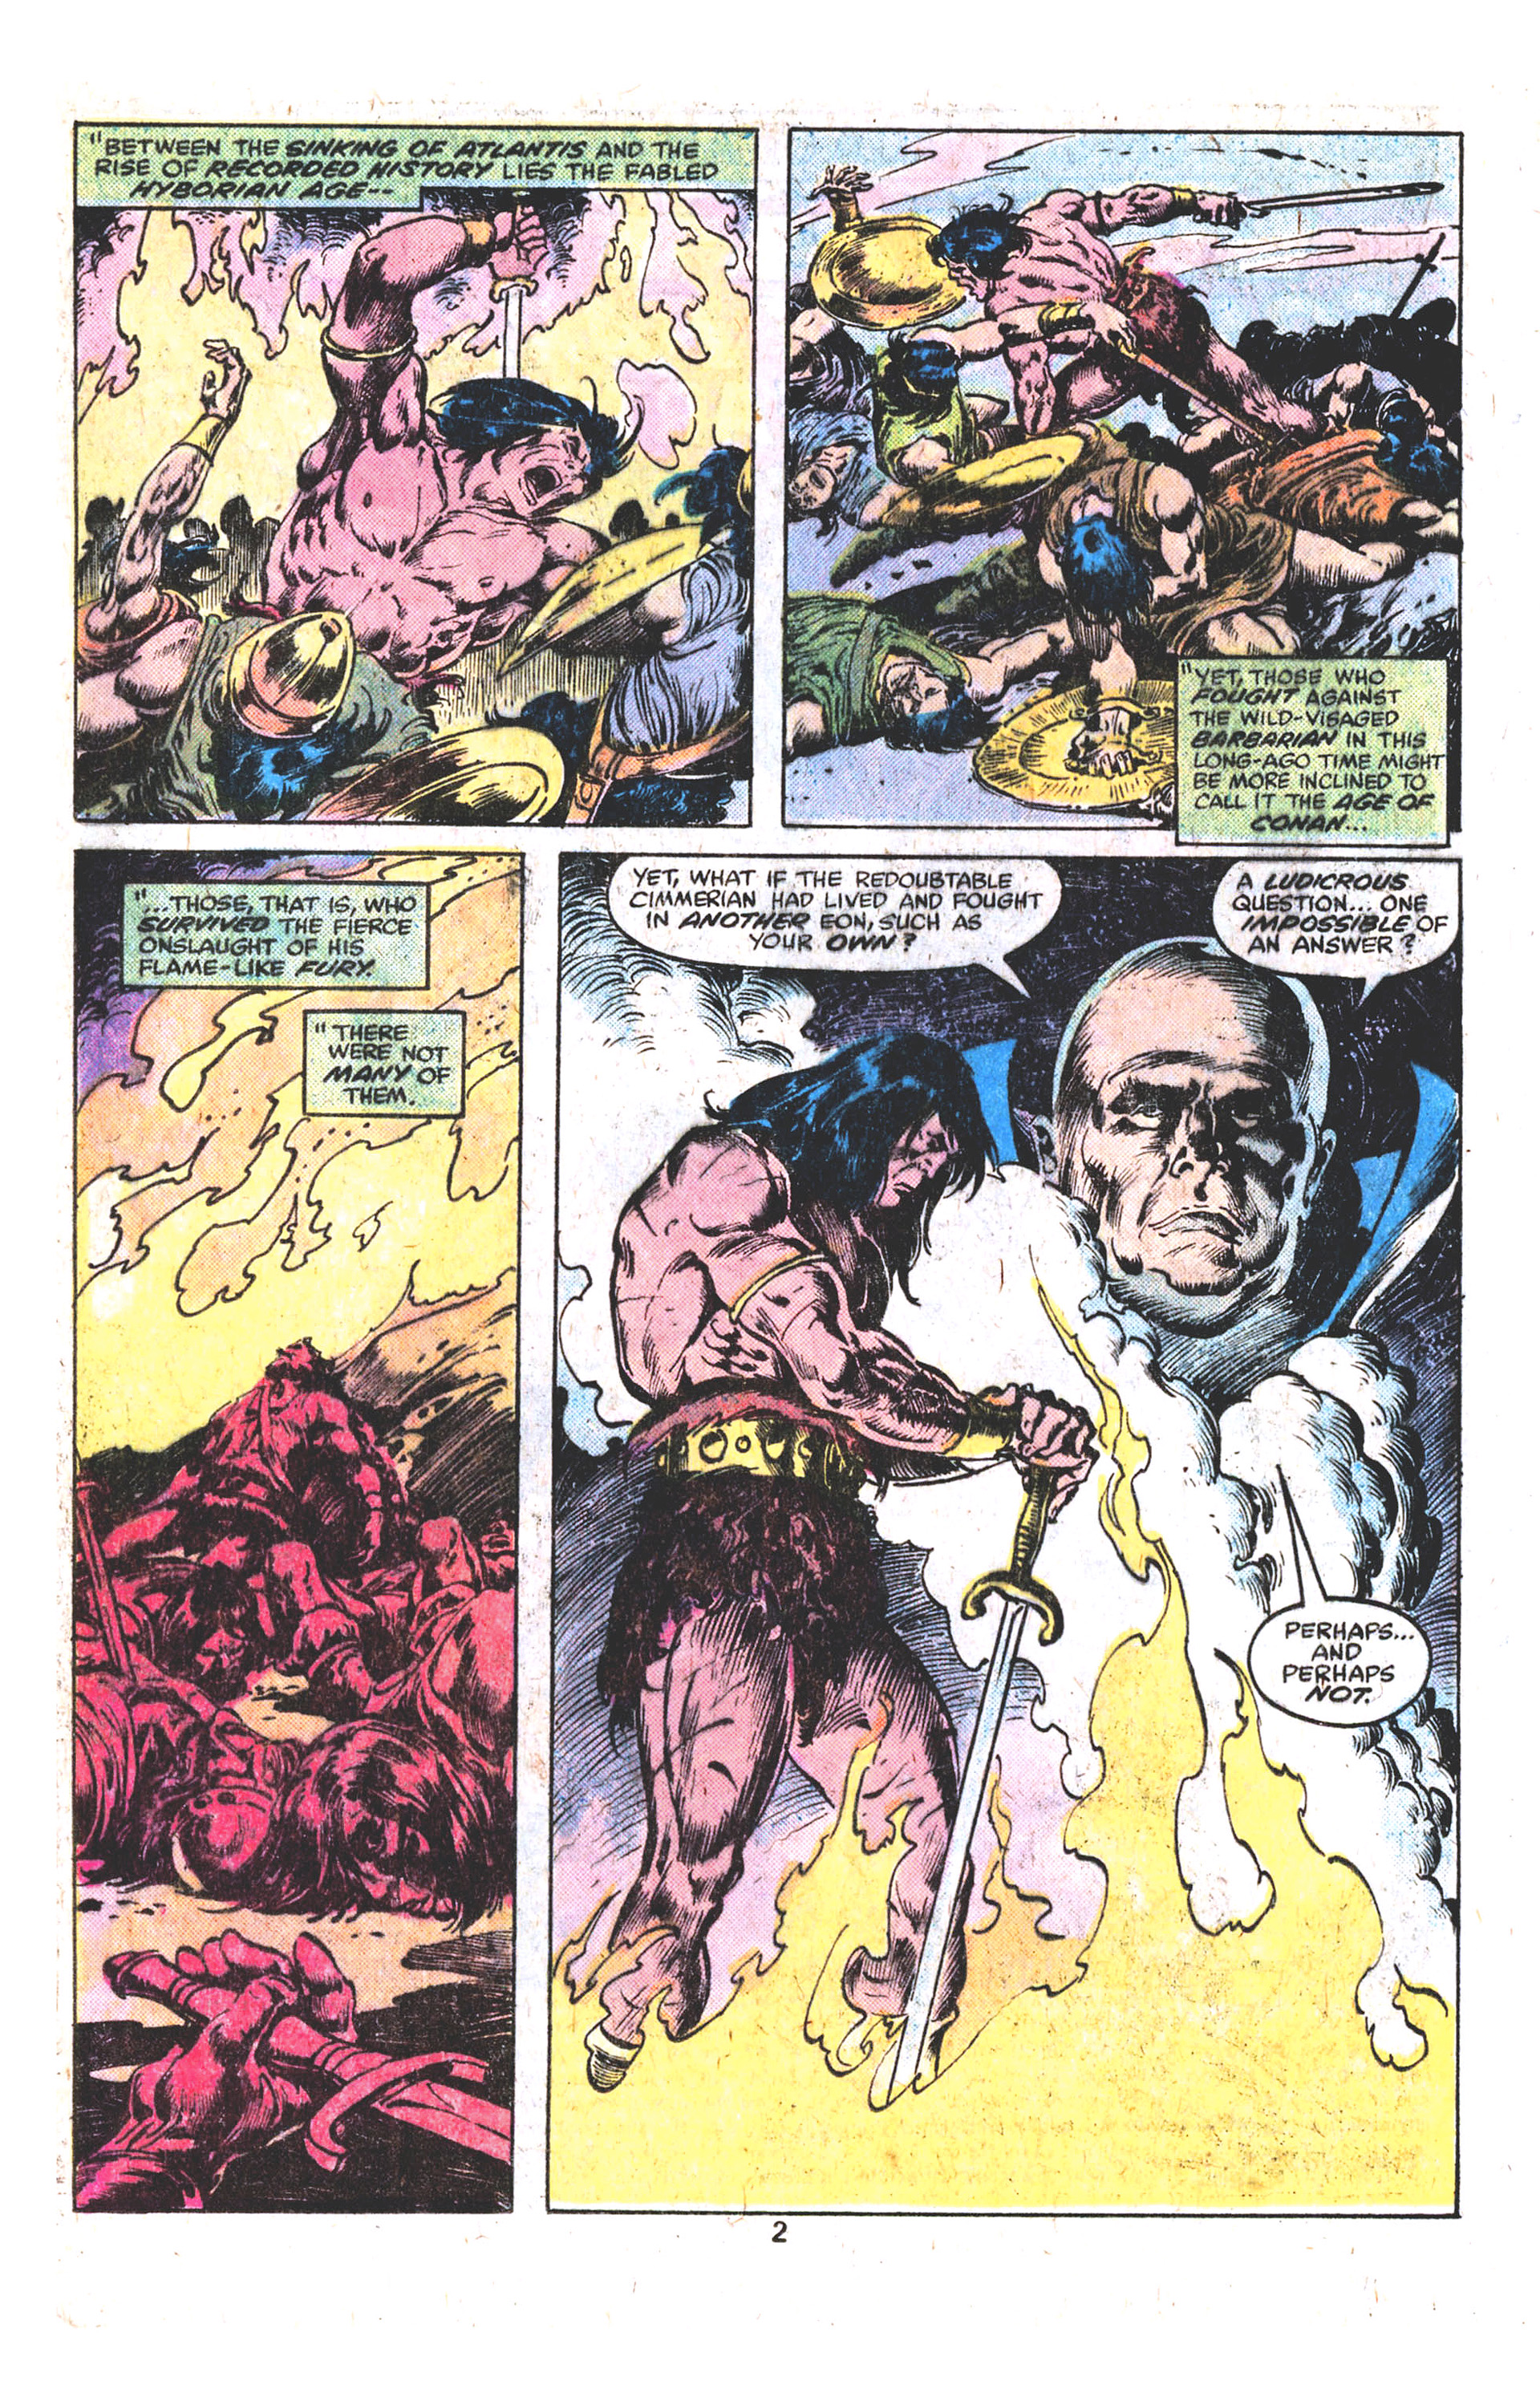 What If? (1977) Issue #13 - Conan The Barbarian walked the Earth Today #13 - English 3